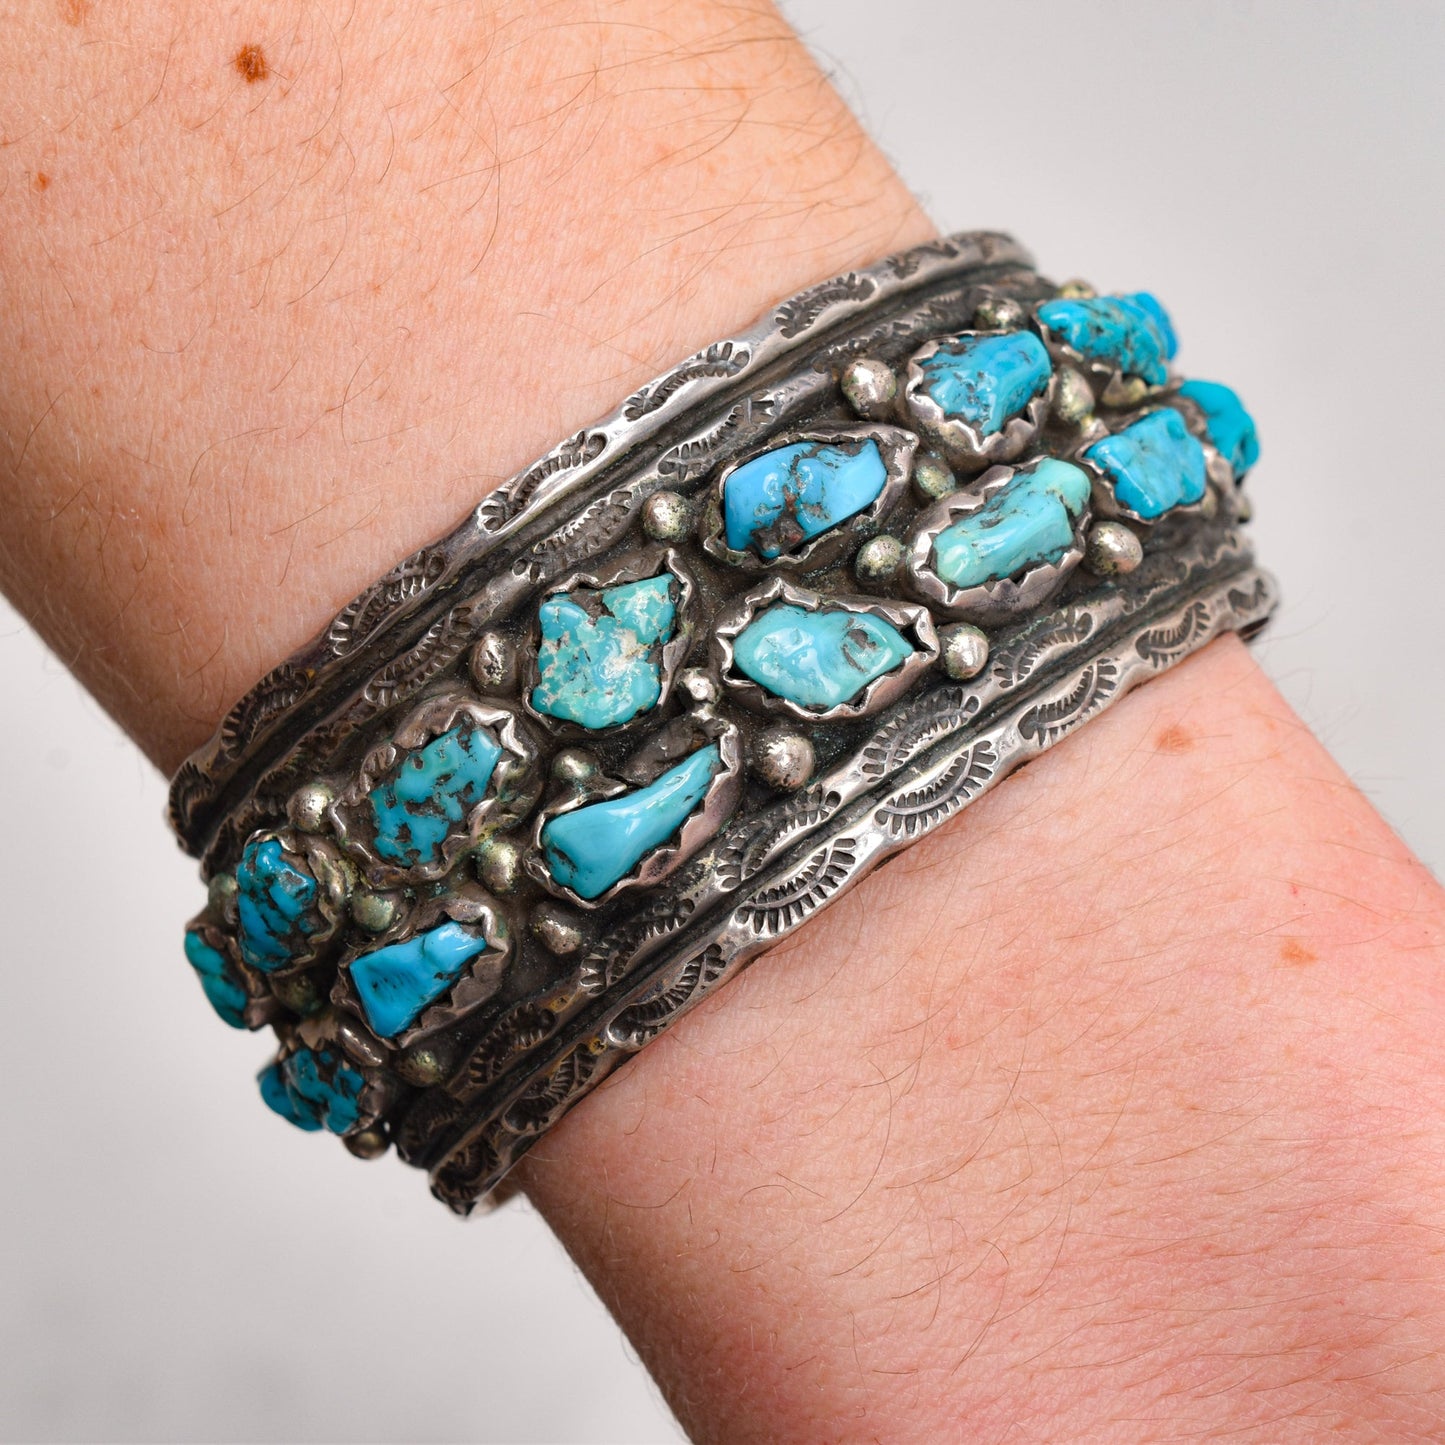 Native American Natural Turquoise Cluster Cuff In Sterling Silver, Old Pawn Jewelry, 5.75" L